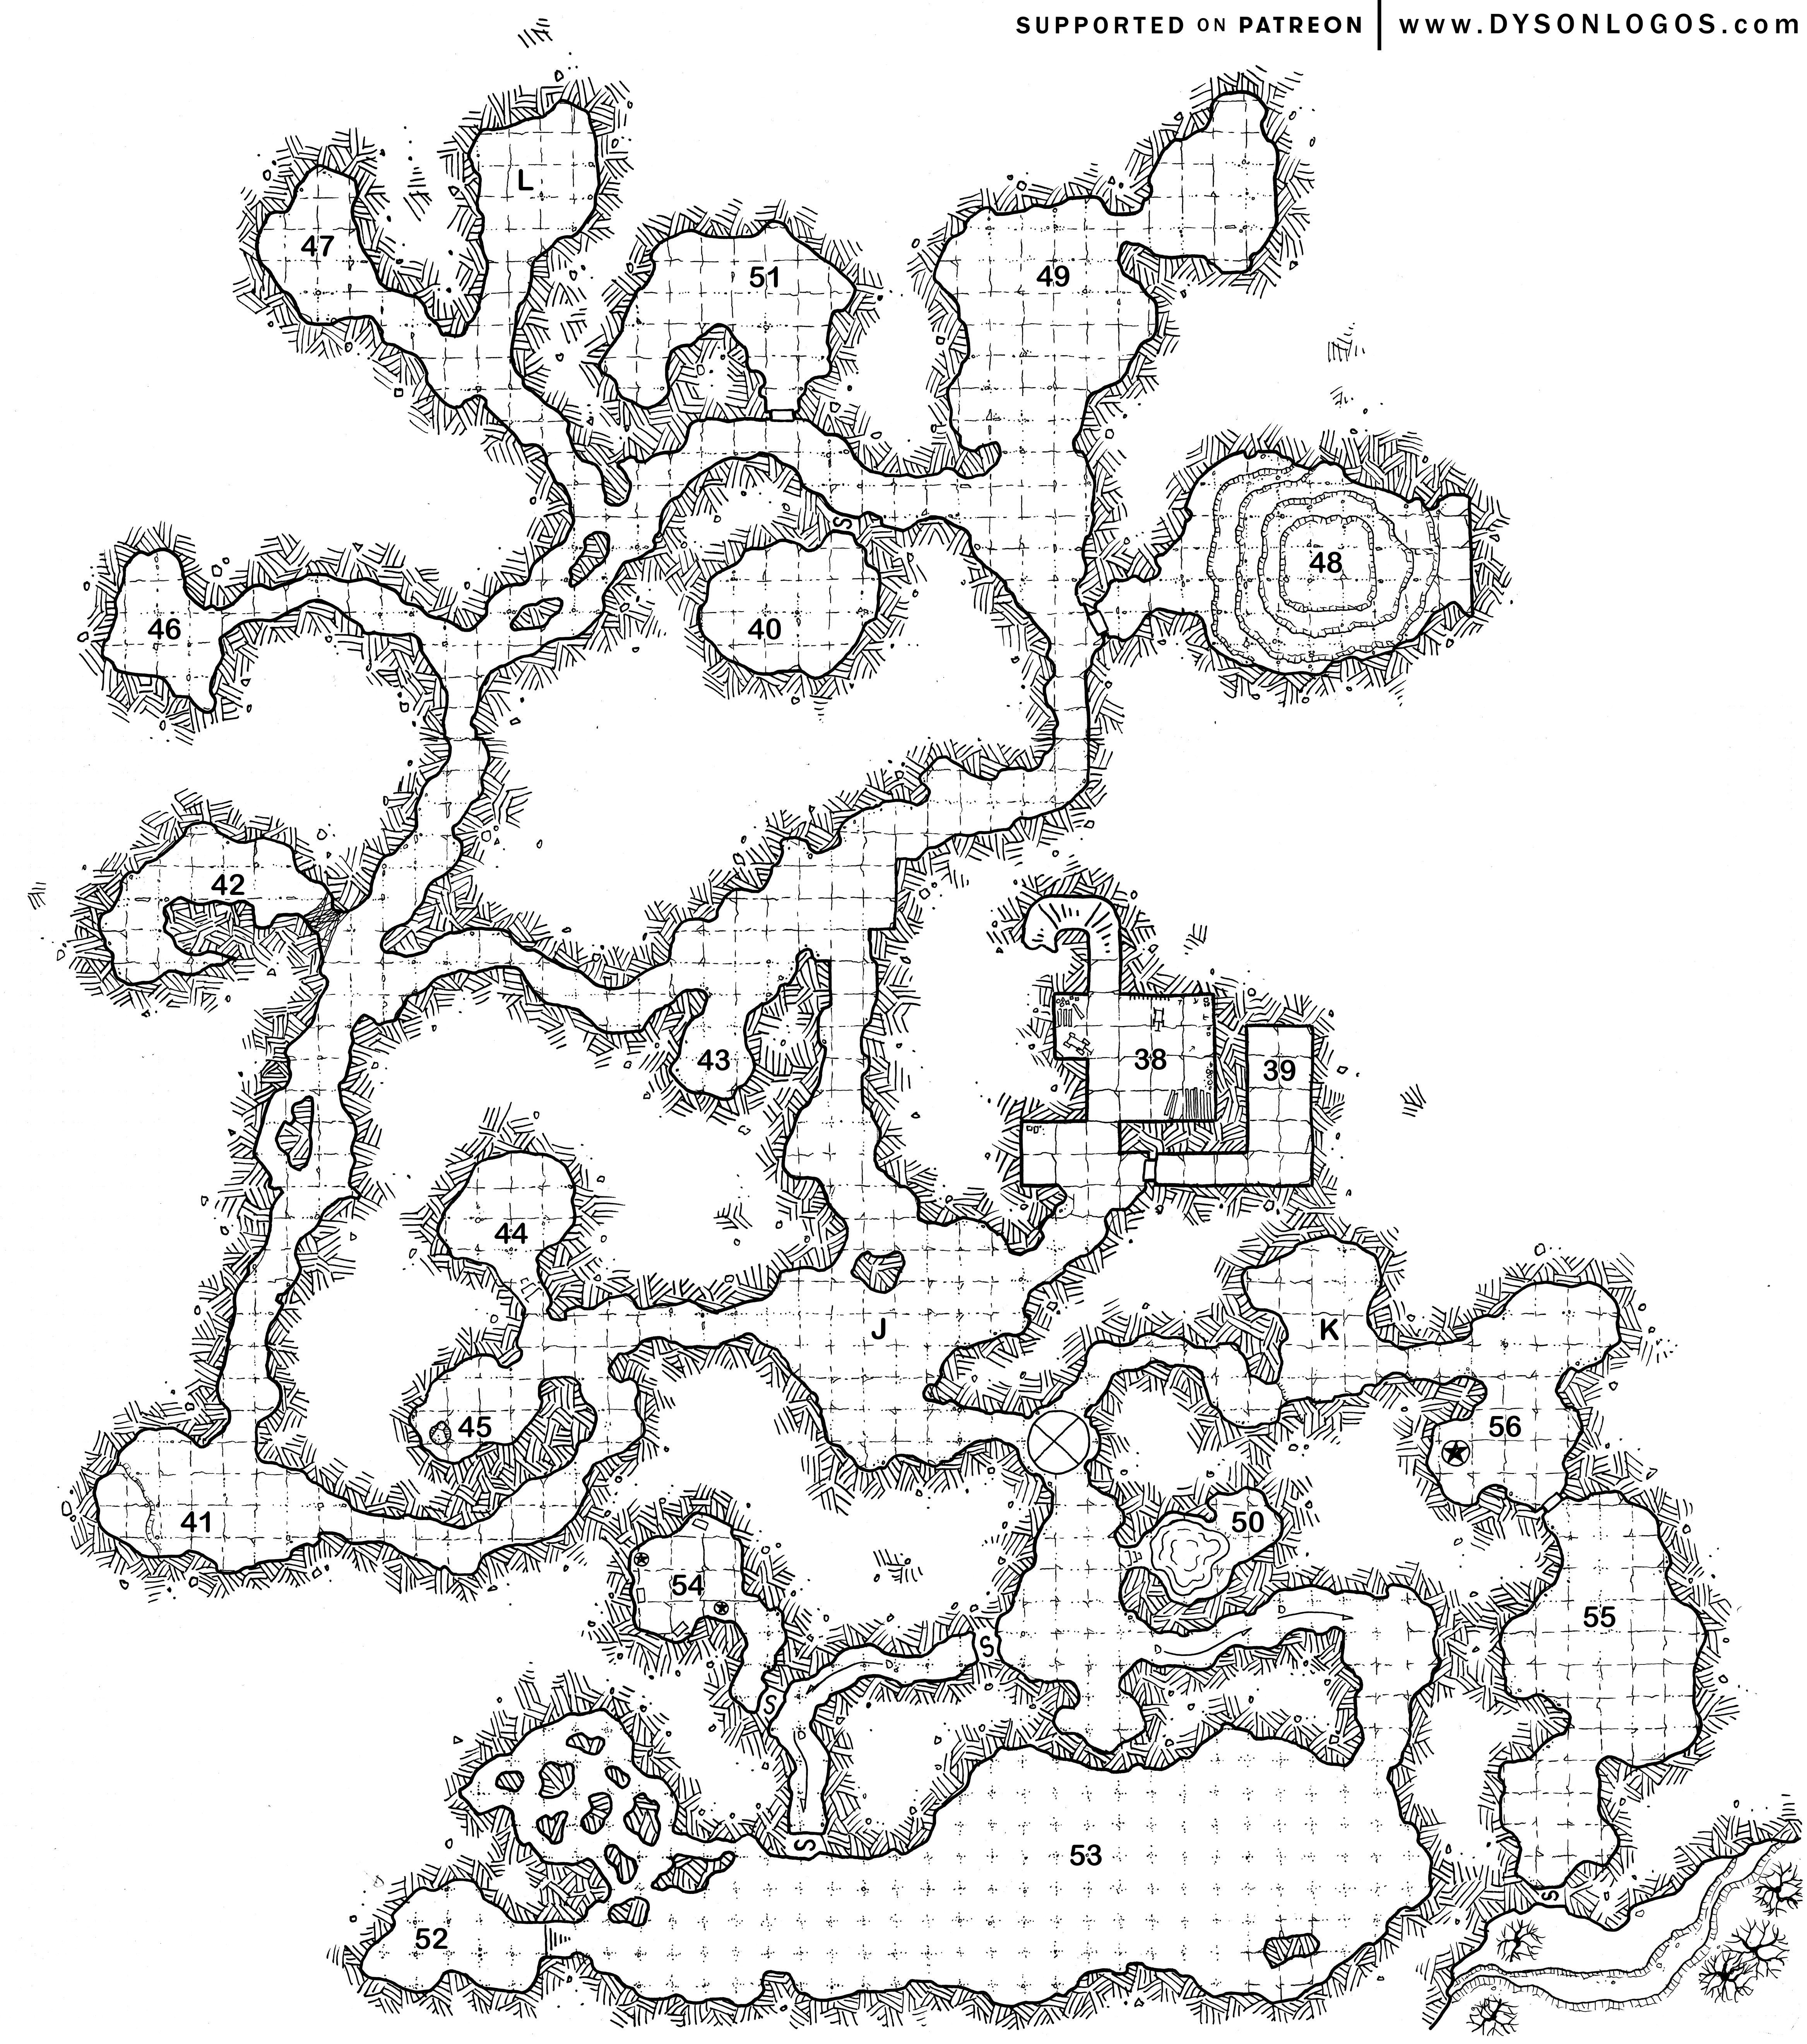 WEB-Caverns-of-Quasqueton-Patreon-Numbered.png